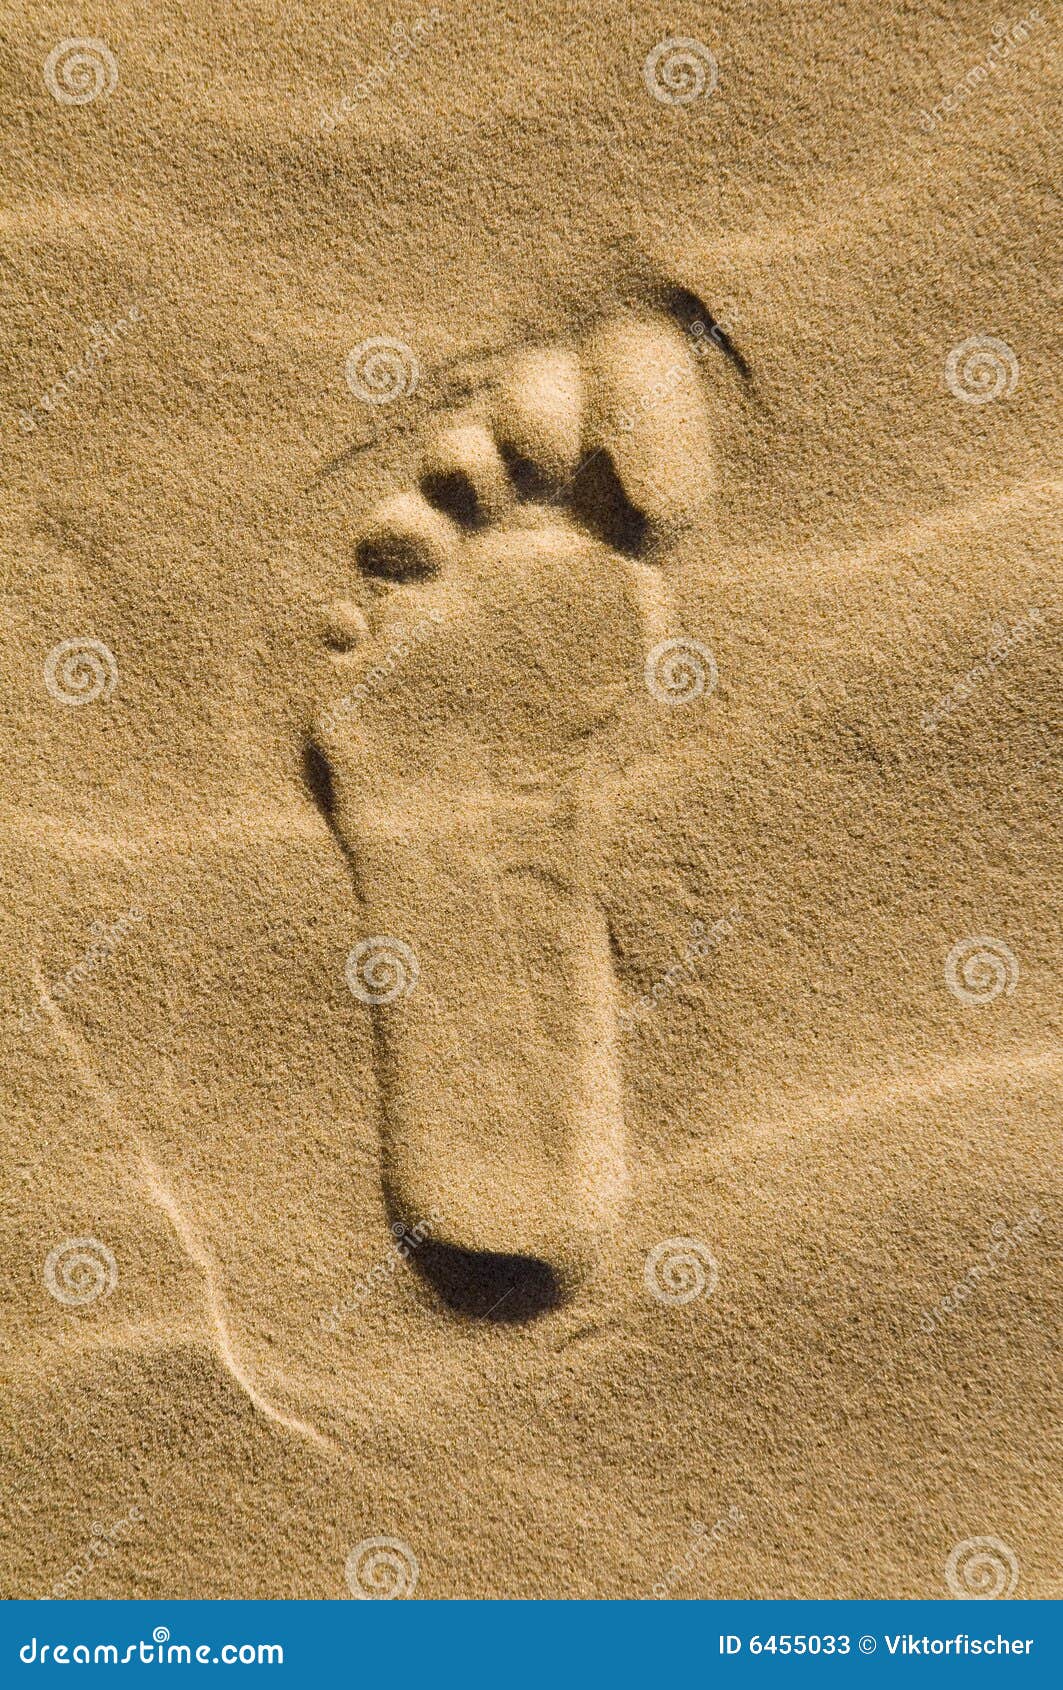 Footprint in the sand stock image. Image of dunes, concept - 6455033